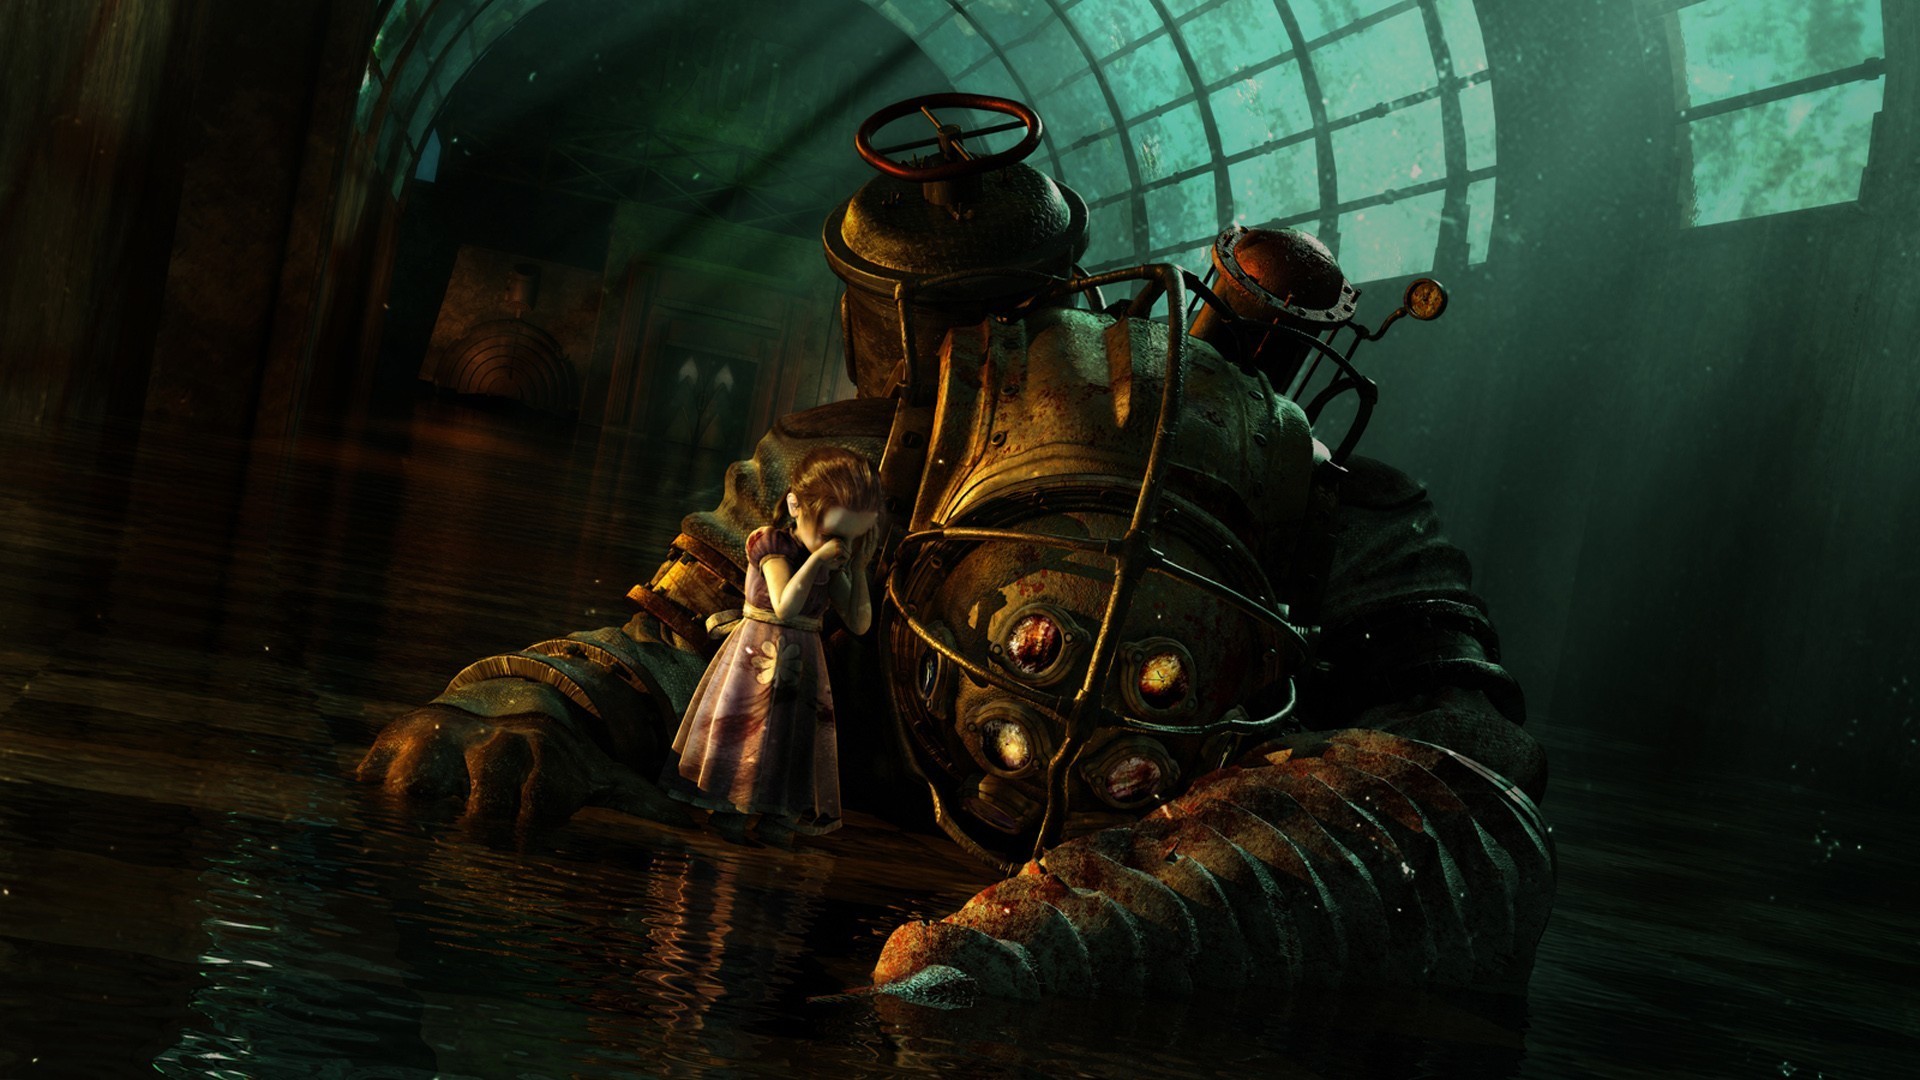 1920x1080 Bioshock The Collection Wallpapers Wallpapers) – Adorable Wallpapers